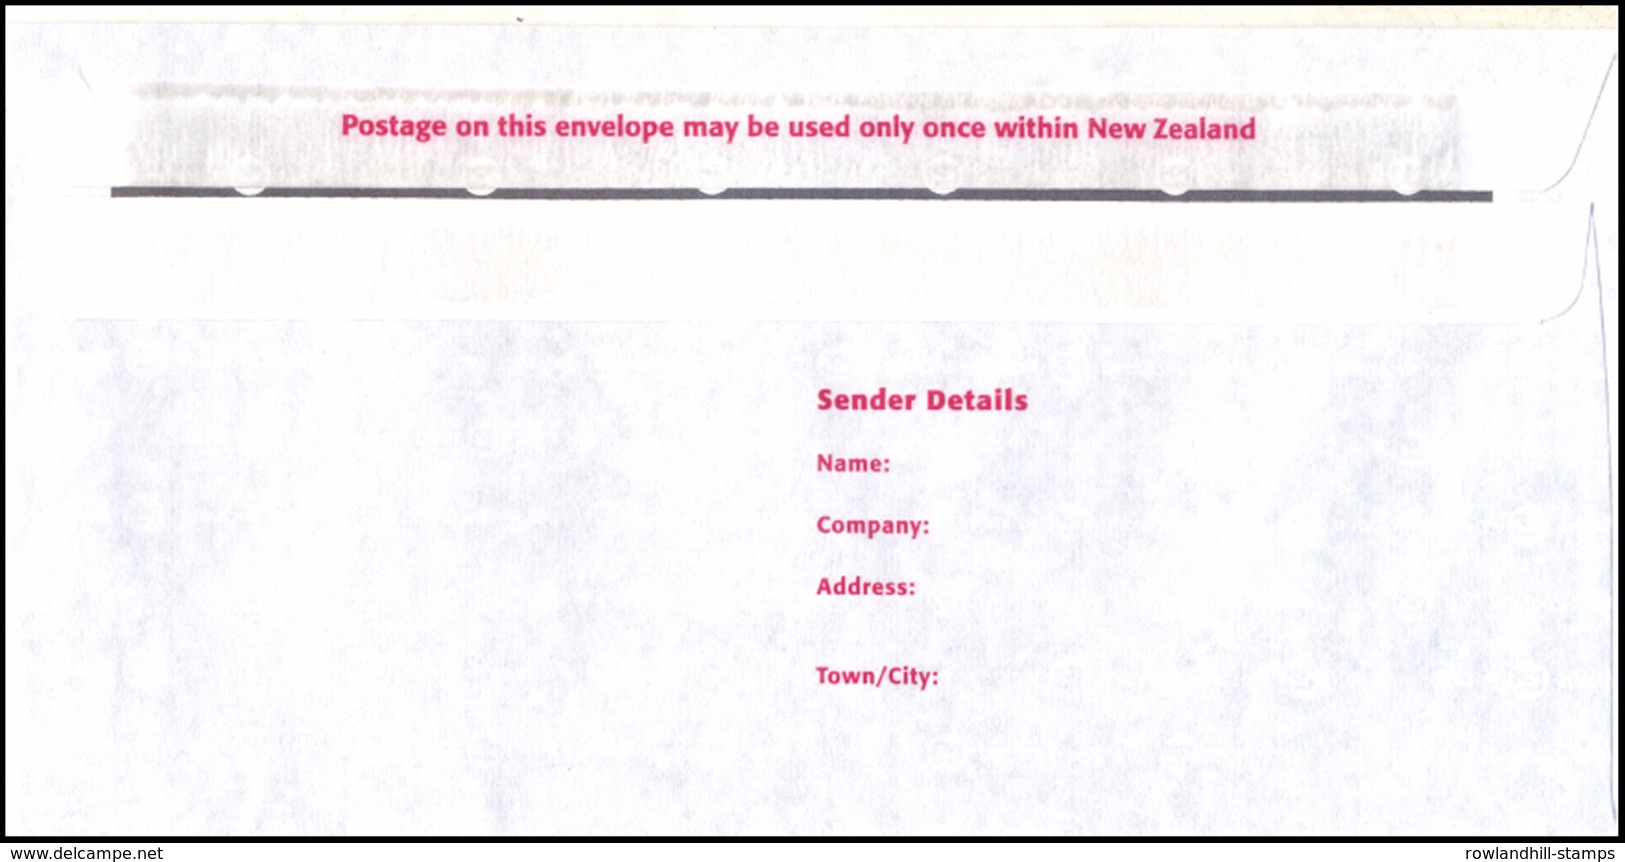 New Zealand, Official Postal Envelope, Stationery Prepaid Postage Included, Unused, WANGANUI, Historic River City Nature - Postal Stationery